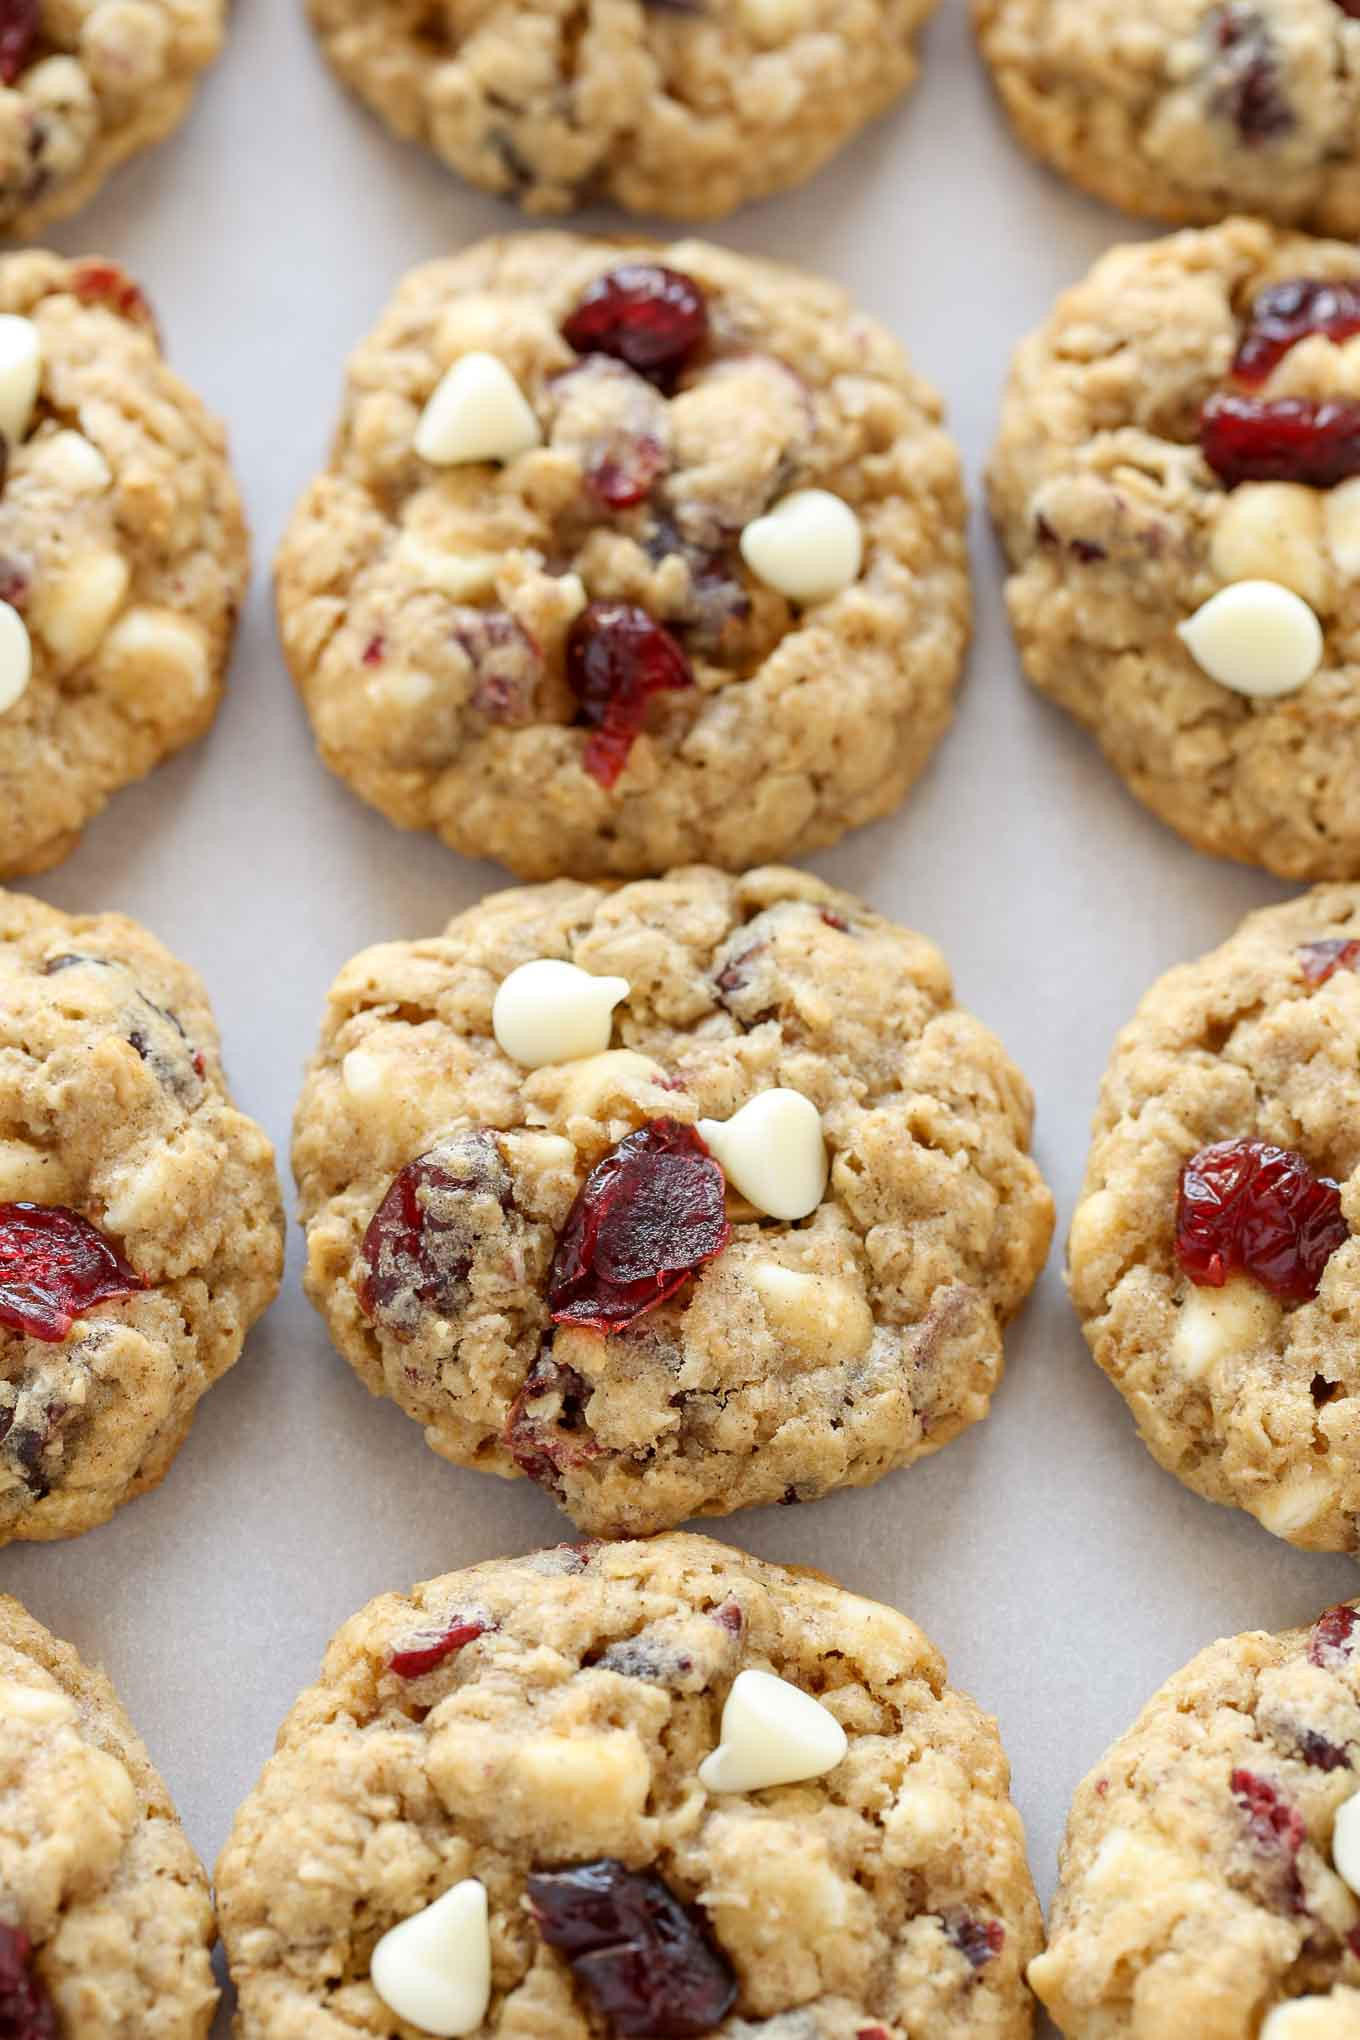 15 Amazing Oatmeal Cranberry Chocolate Chip Cookies